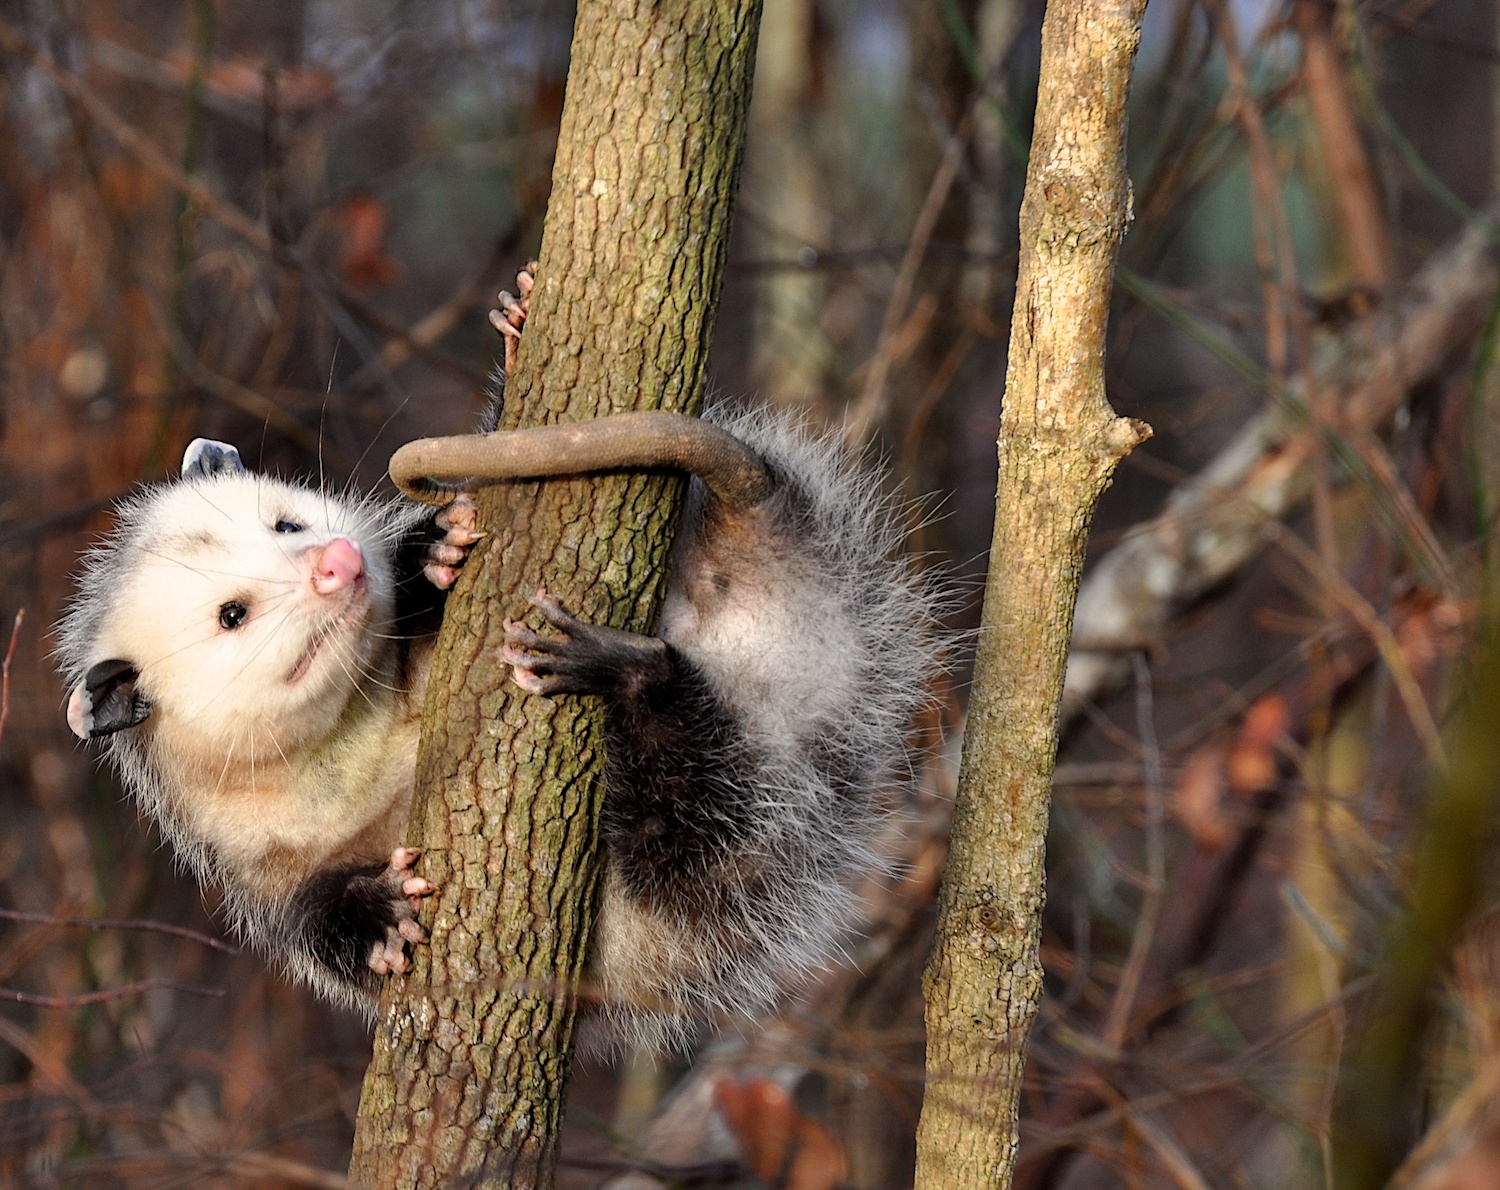 Opossum hanging from tree limb with tail wrapped around it